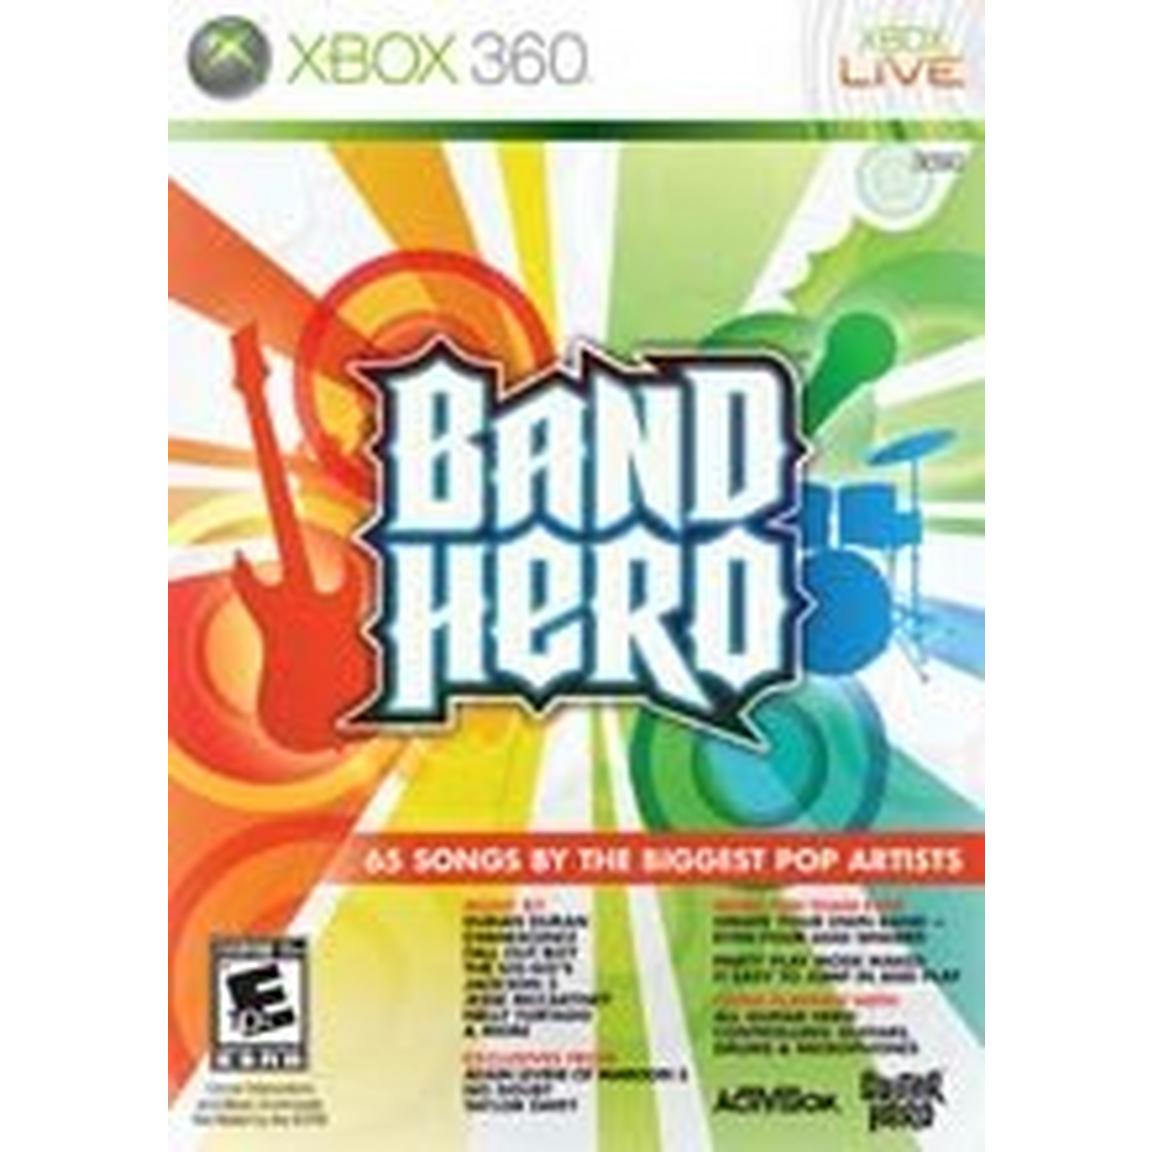 Band Hero, Pre-Owned -  Activision